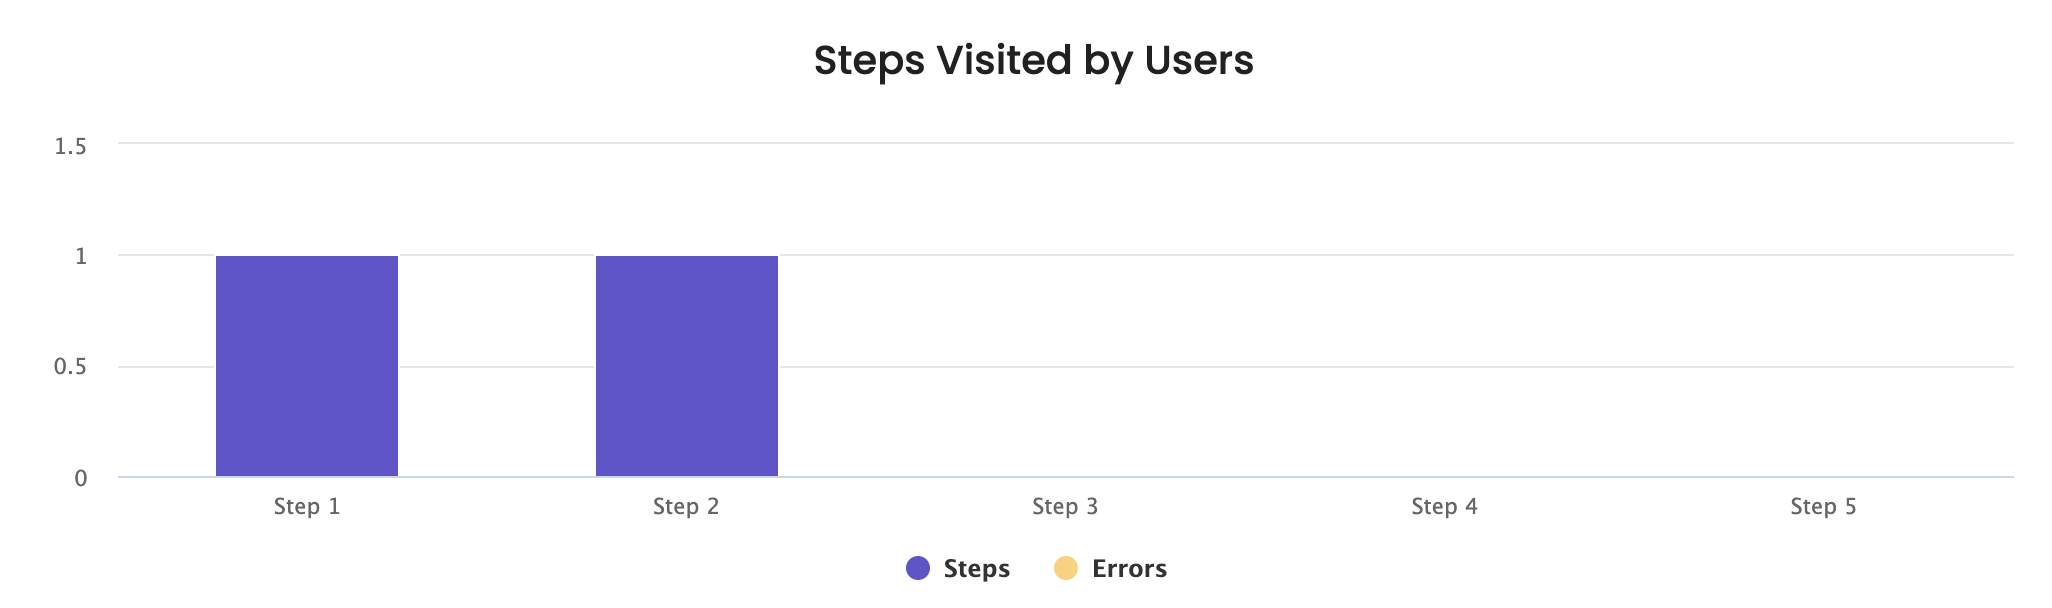 Steps visited by the users